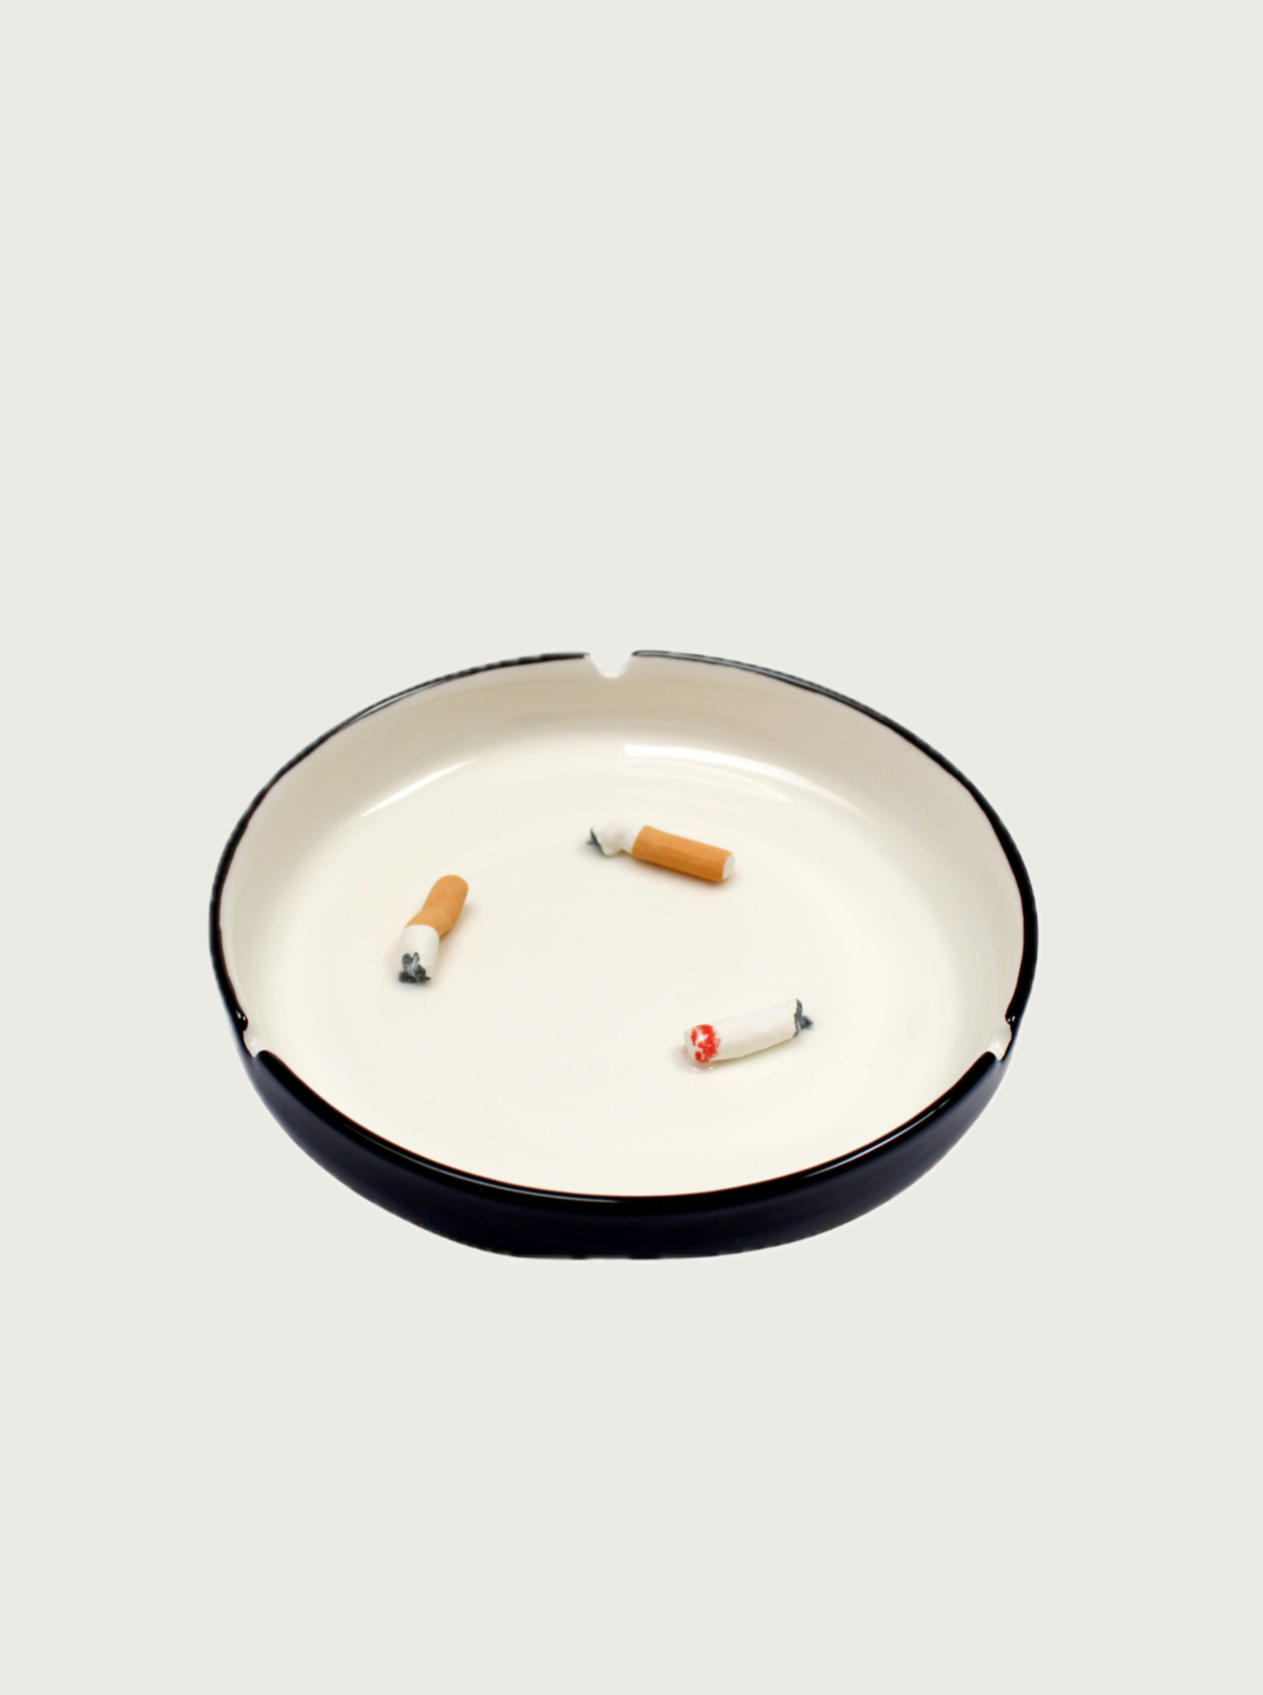 A glazed earthenware Cigarette Butts Ashtray by Villa Arev sits on a plain surface, holding four cigarette butts arranged at different angles. The background is a light cream color, reminiscent of a Mediterranean getaway at Villa Arev, and the ashtray has three notches around its rim.